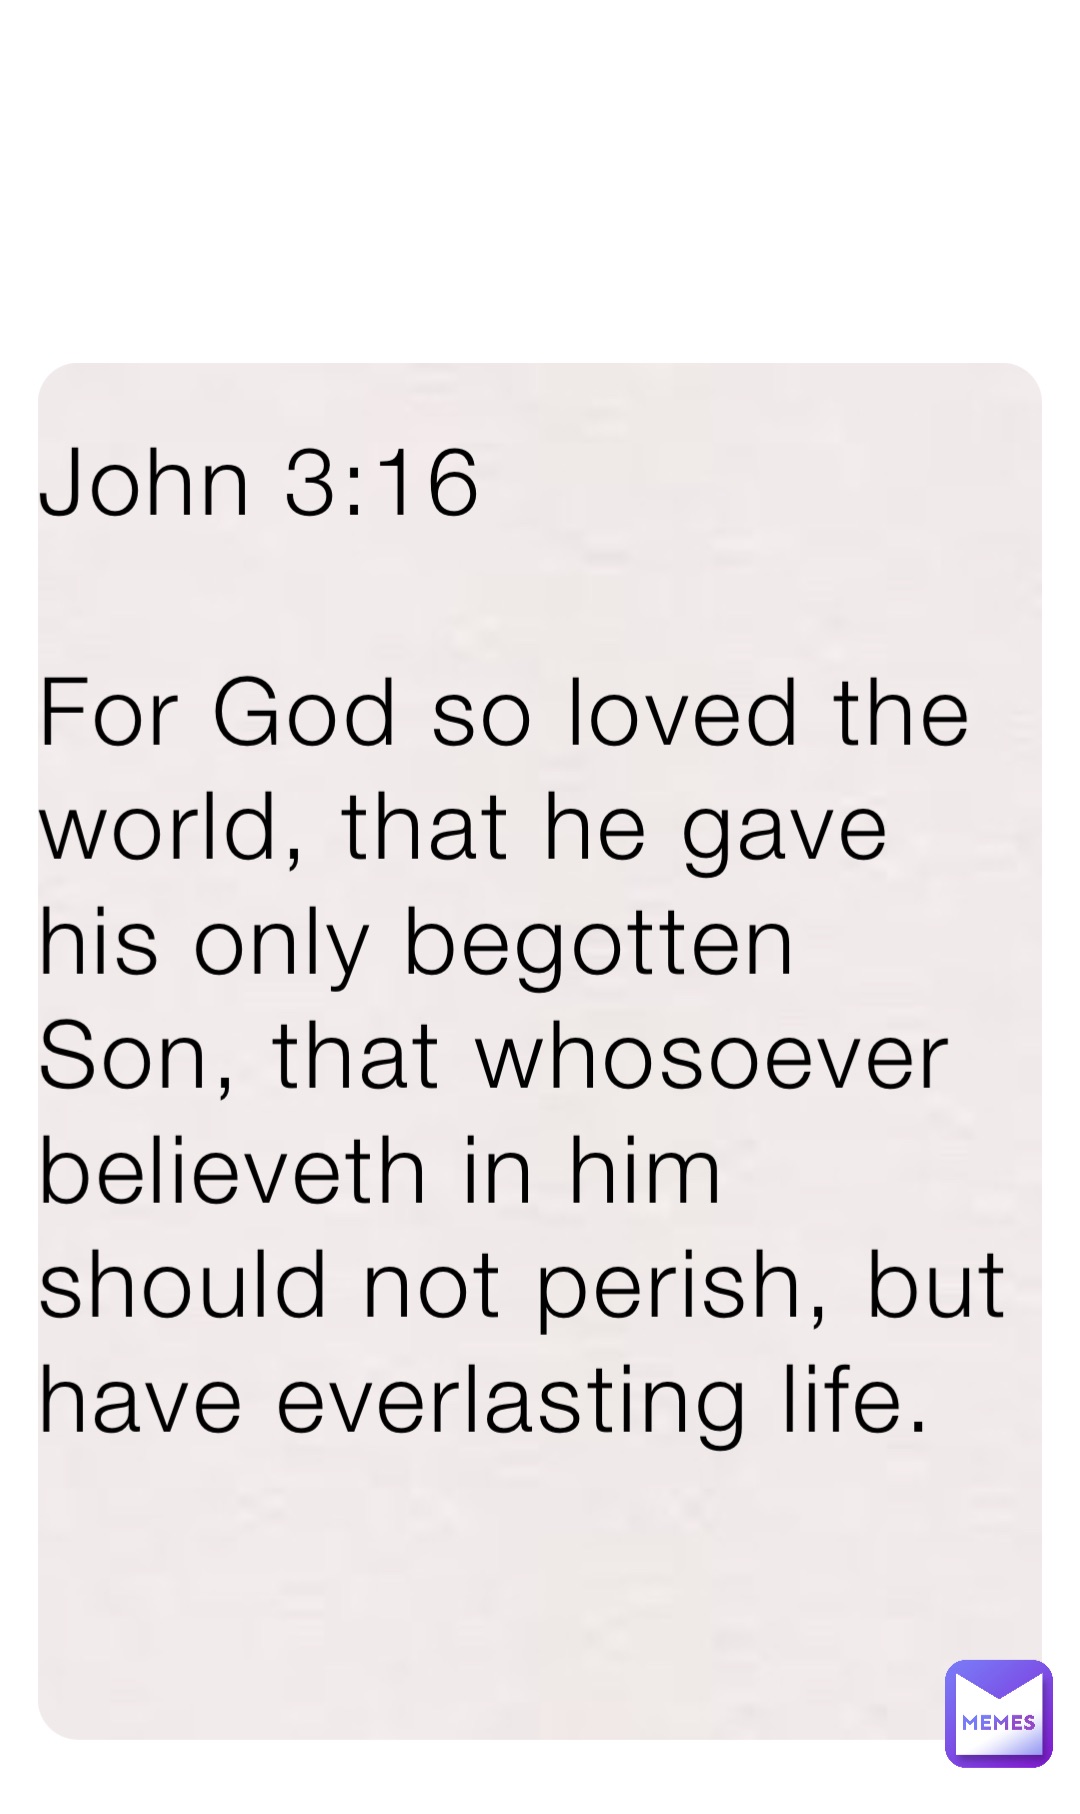 John 3:16 

For God so loved the world, that he gave his only begotten Son, that whosoever believeth in him should not perish, but have everlasting life.